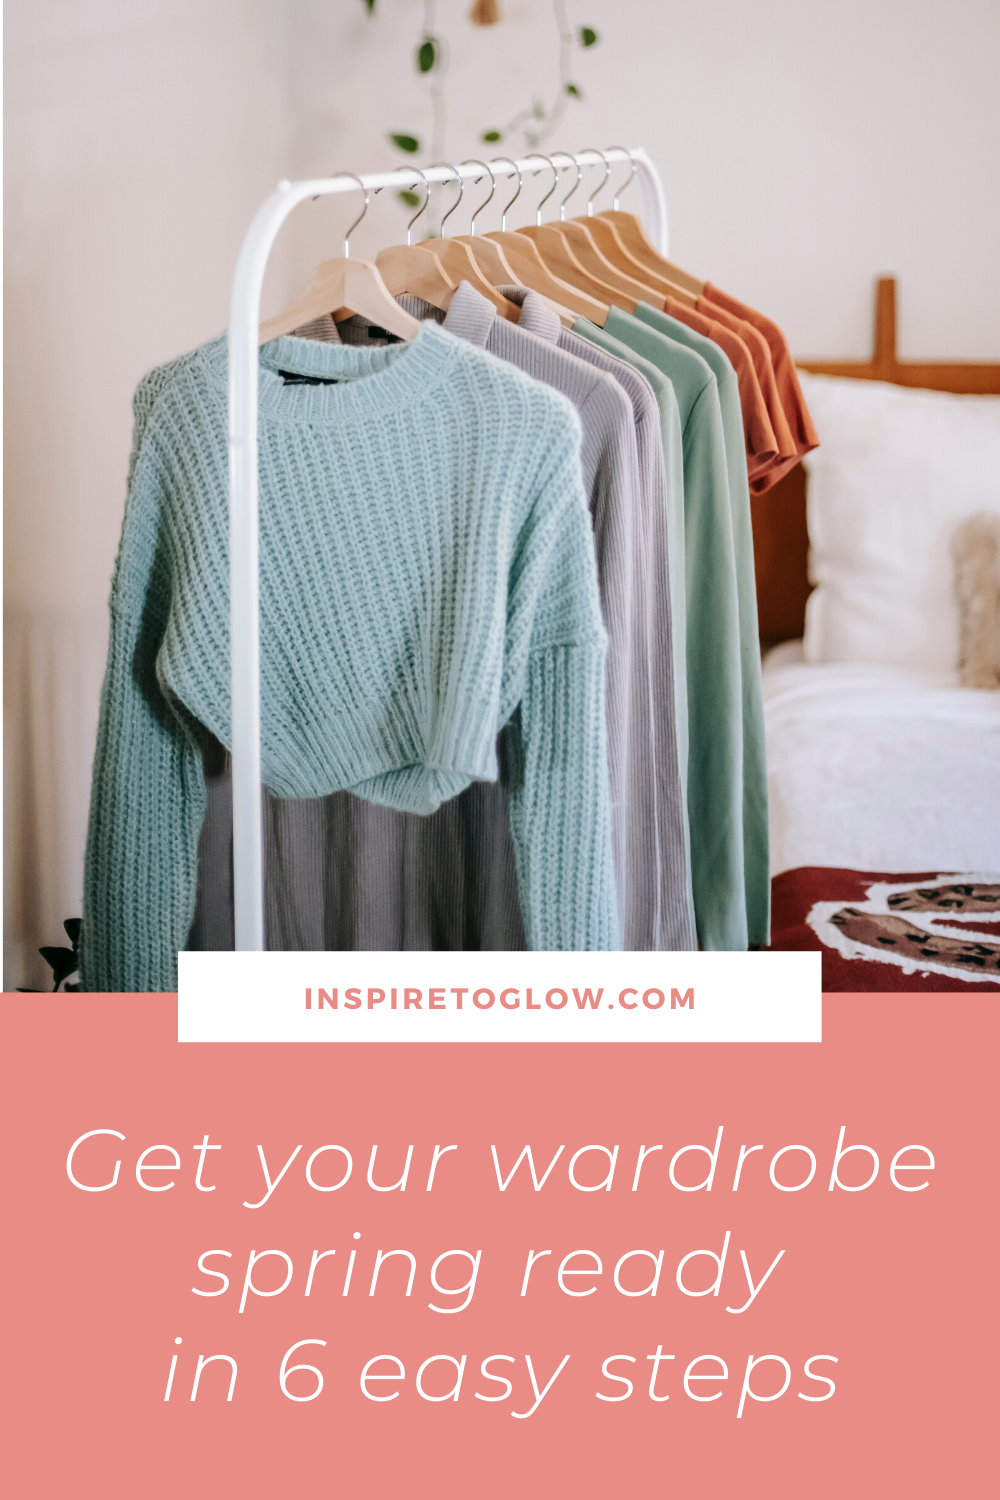 How to get your wardrobe spring ready in 6 easy steps | Spring Cleaning Guide - Fashion - Inspire to Glow Blog - Pinterest Pin this blog post for later